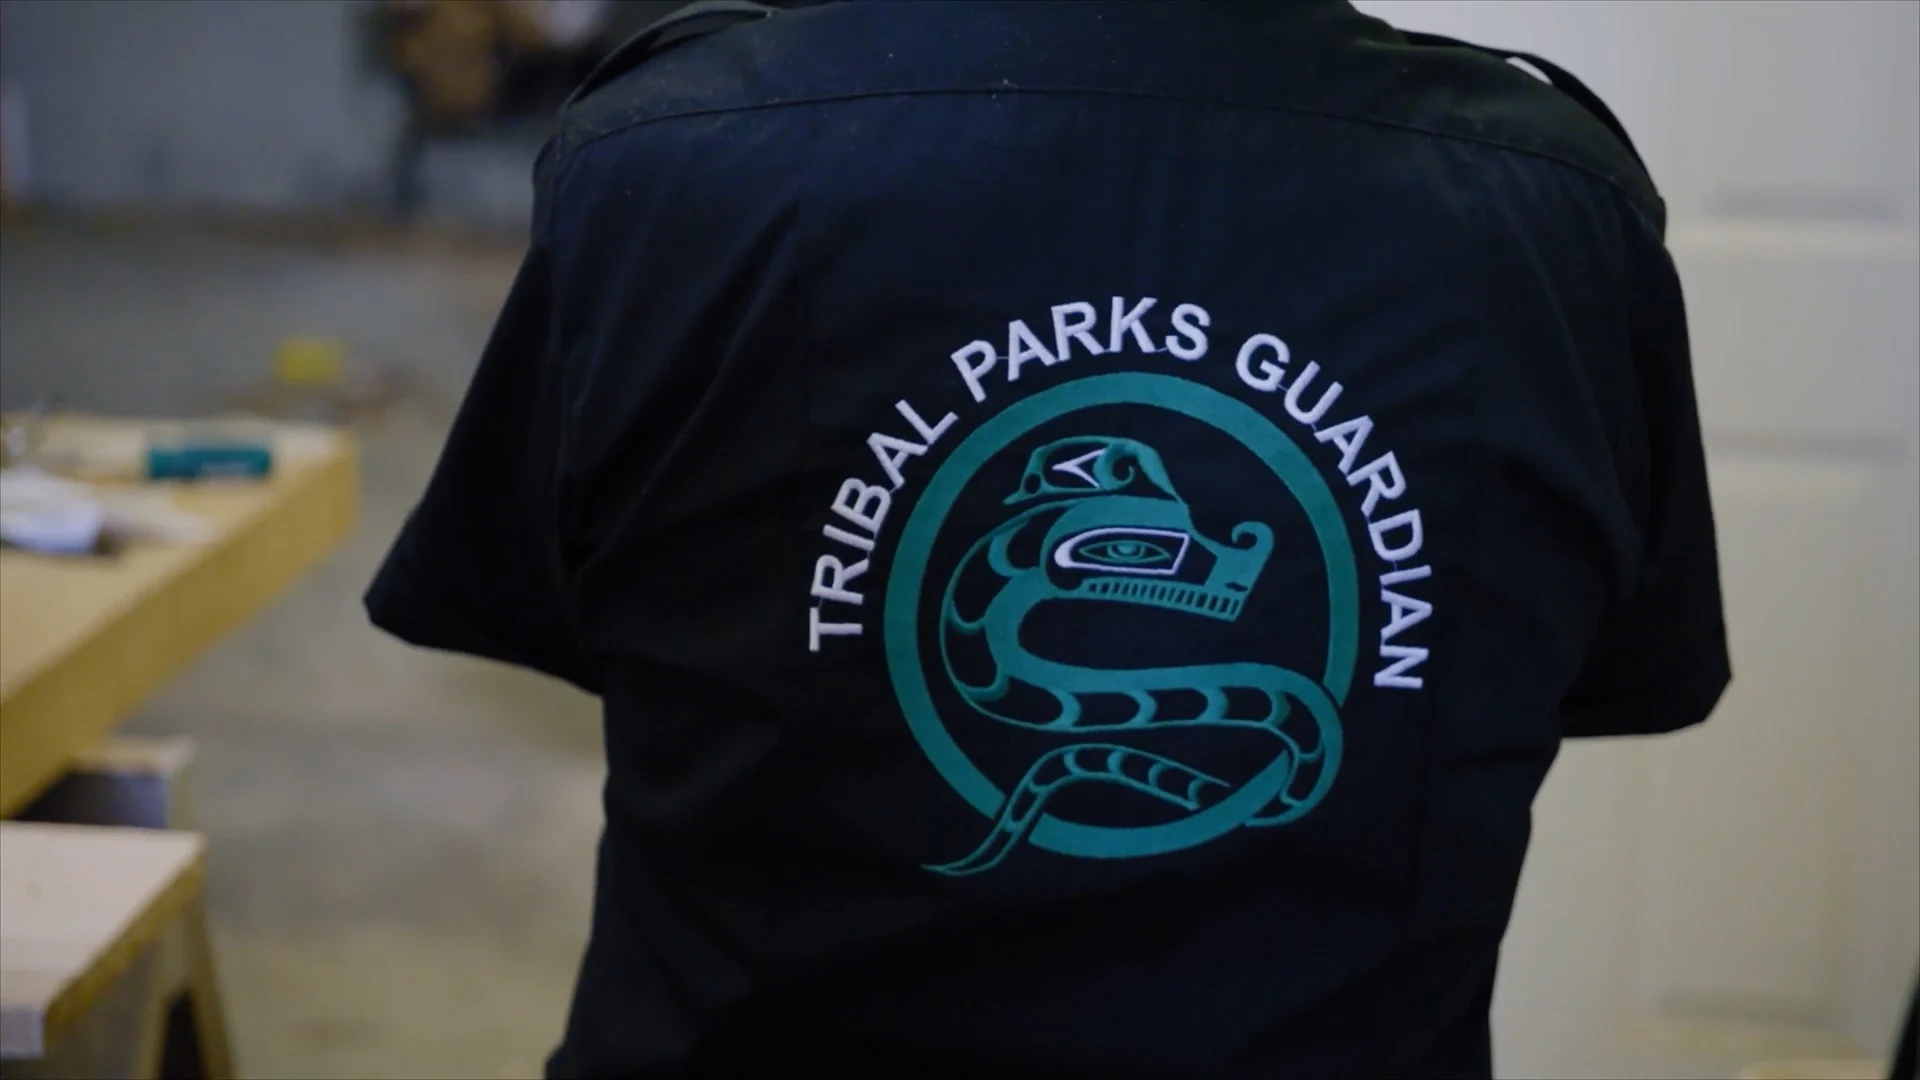 The back of Masso’s shirt displays the logo for the Tribal Parks Guardianship program. (Power to the People)